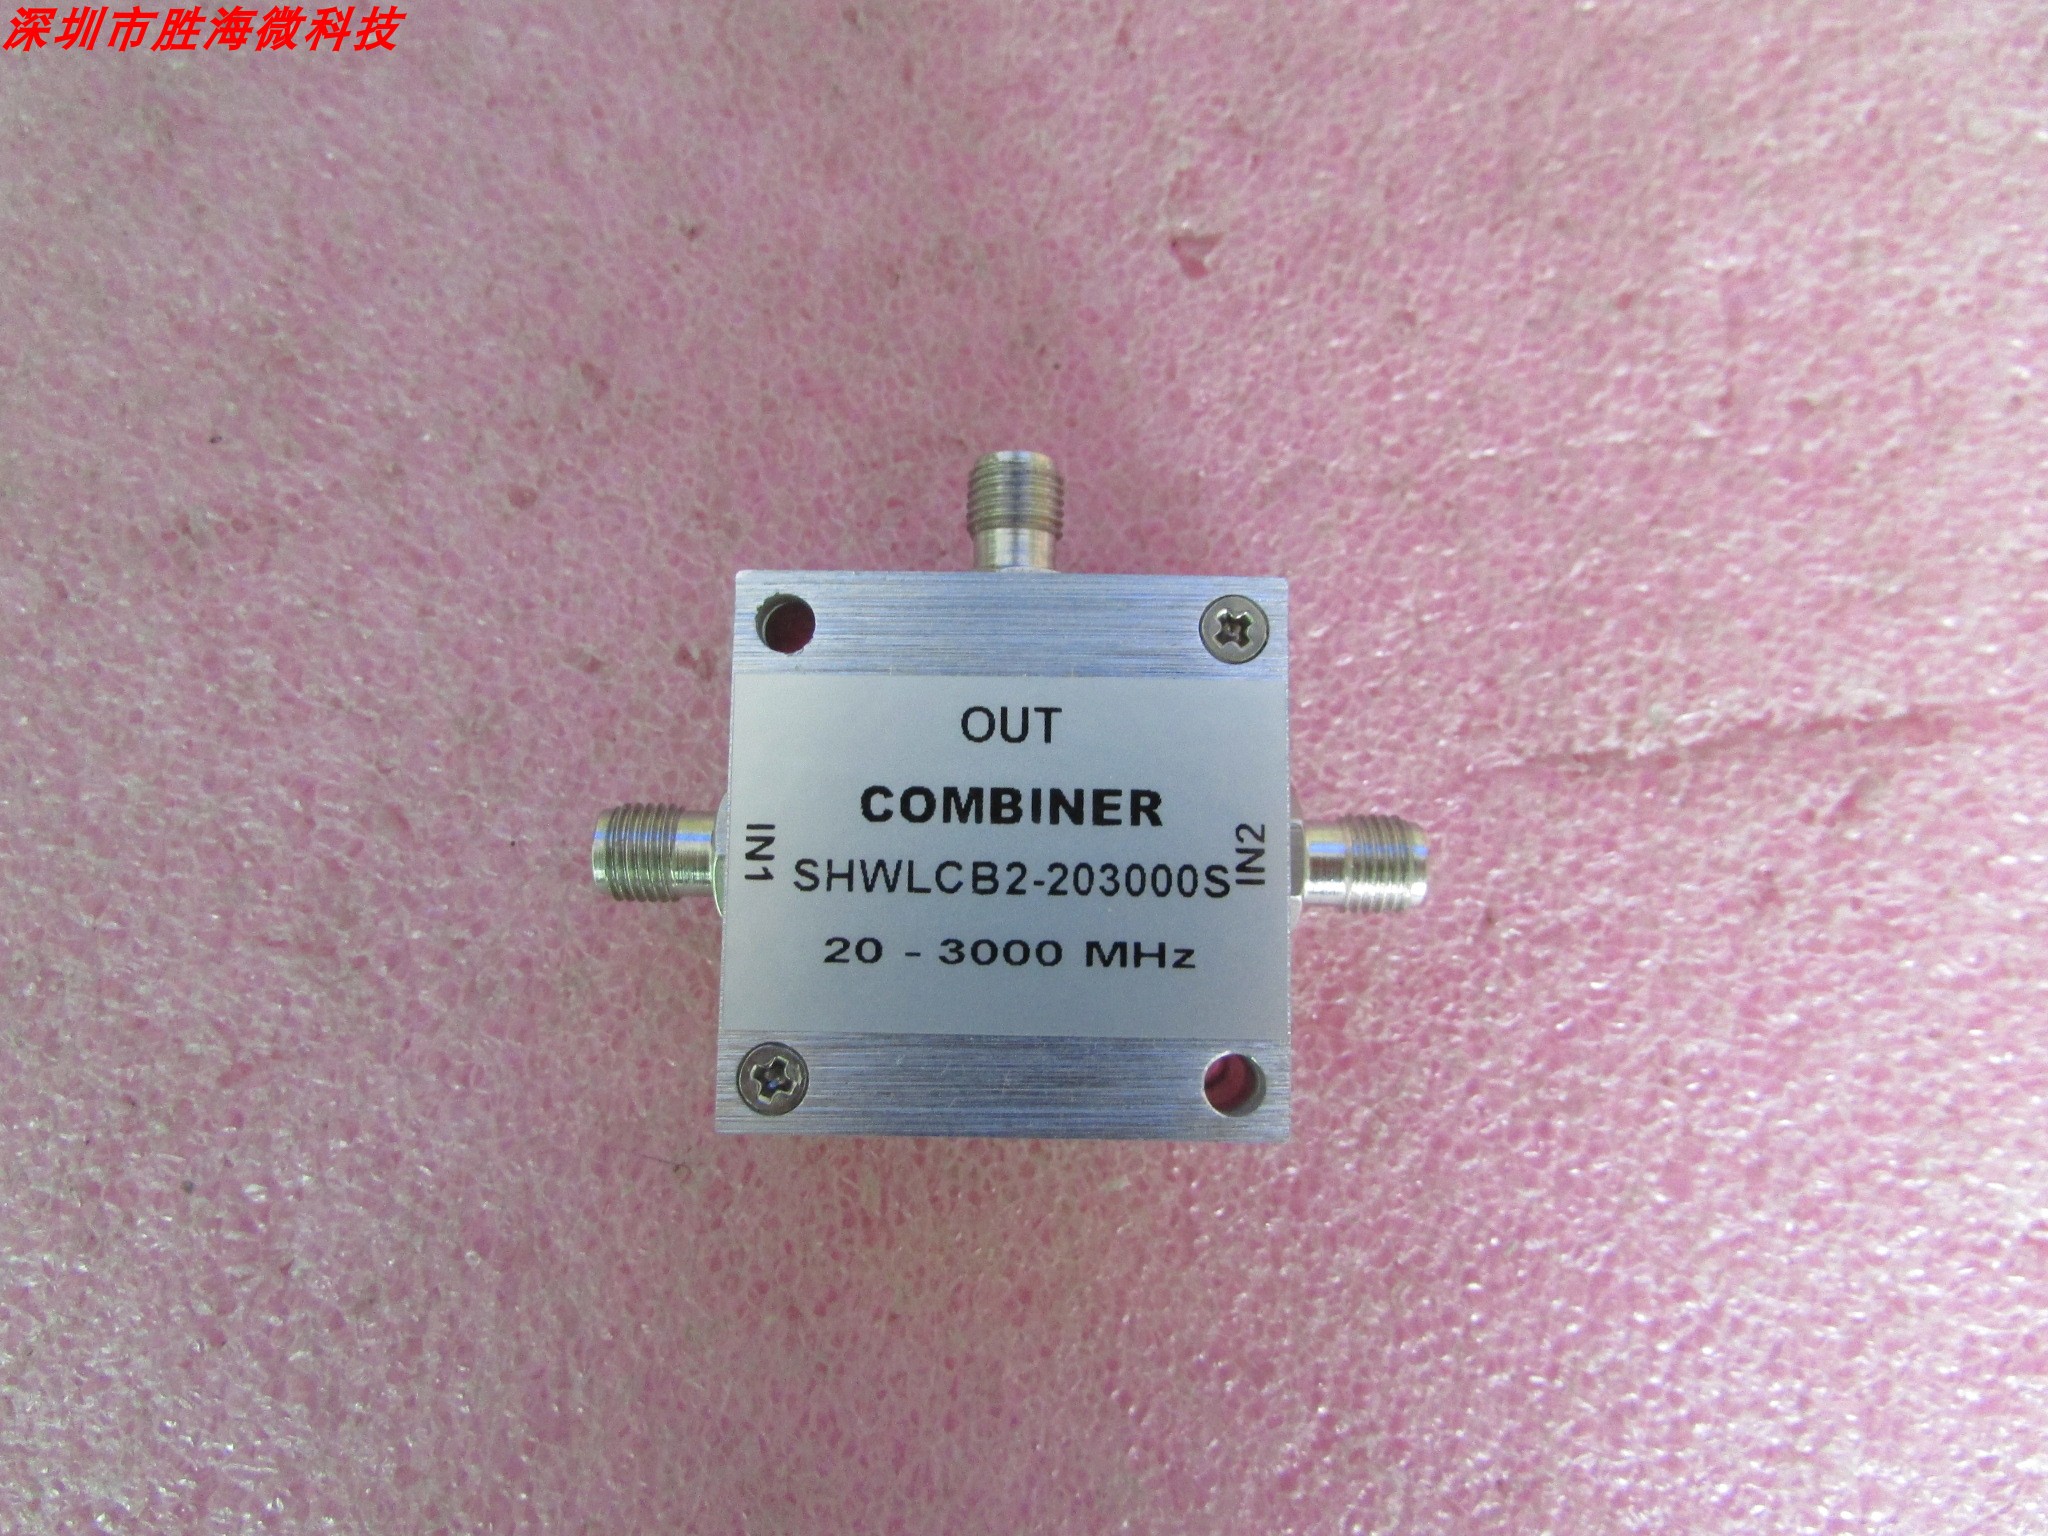 SHWLCB2-203000S SHWLCB2-203000S 20-3000MHz SMA Radio Frequency coaxial power two-in-one mixer